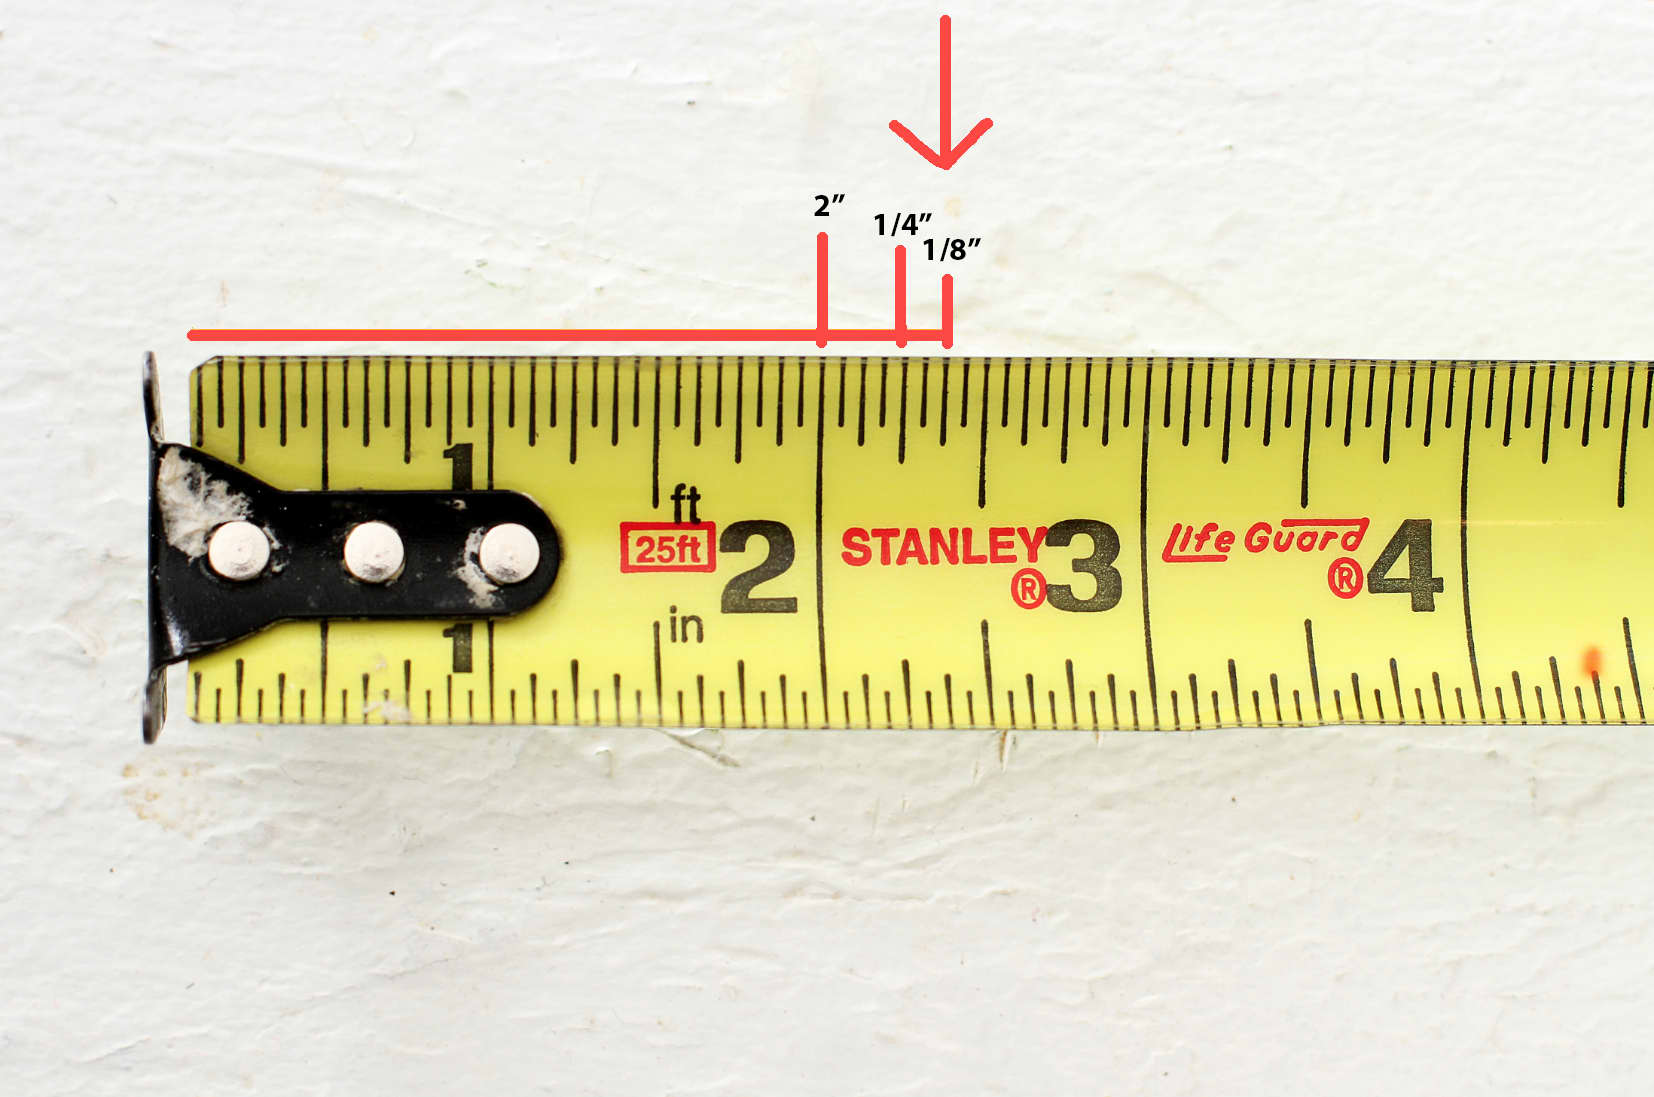 what does the scid measure